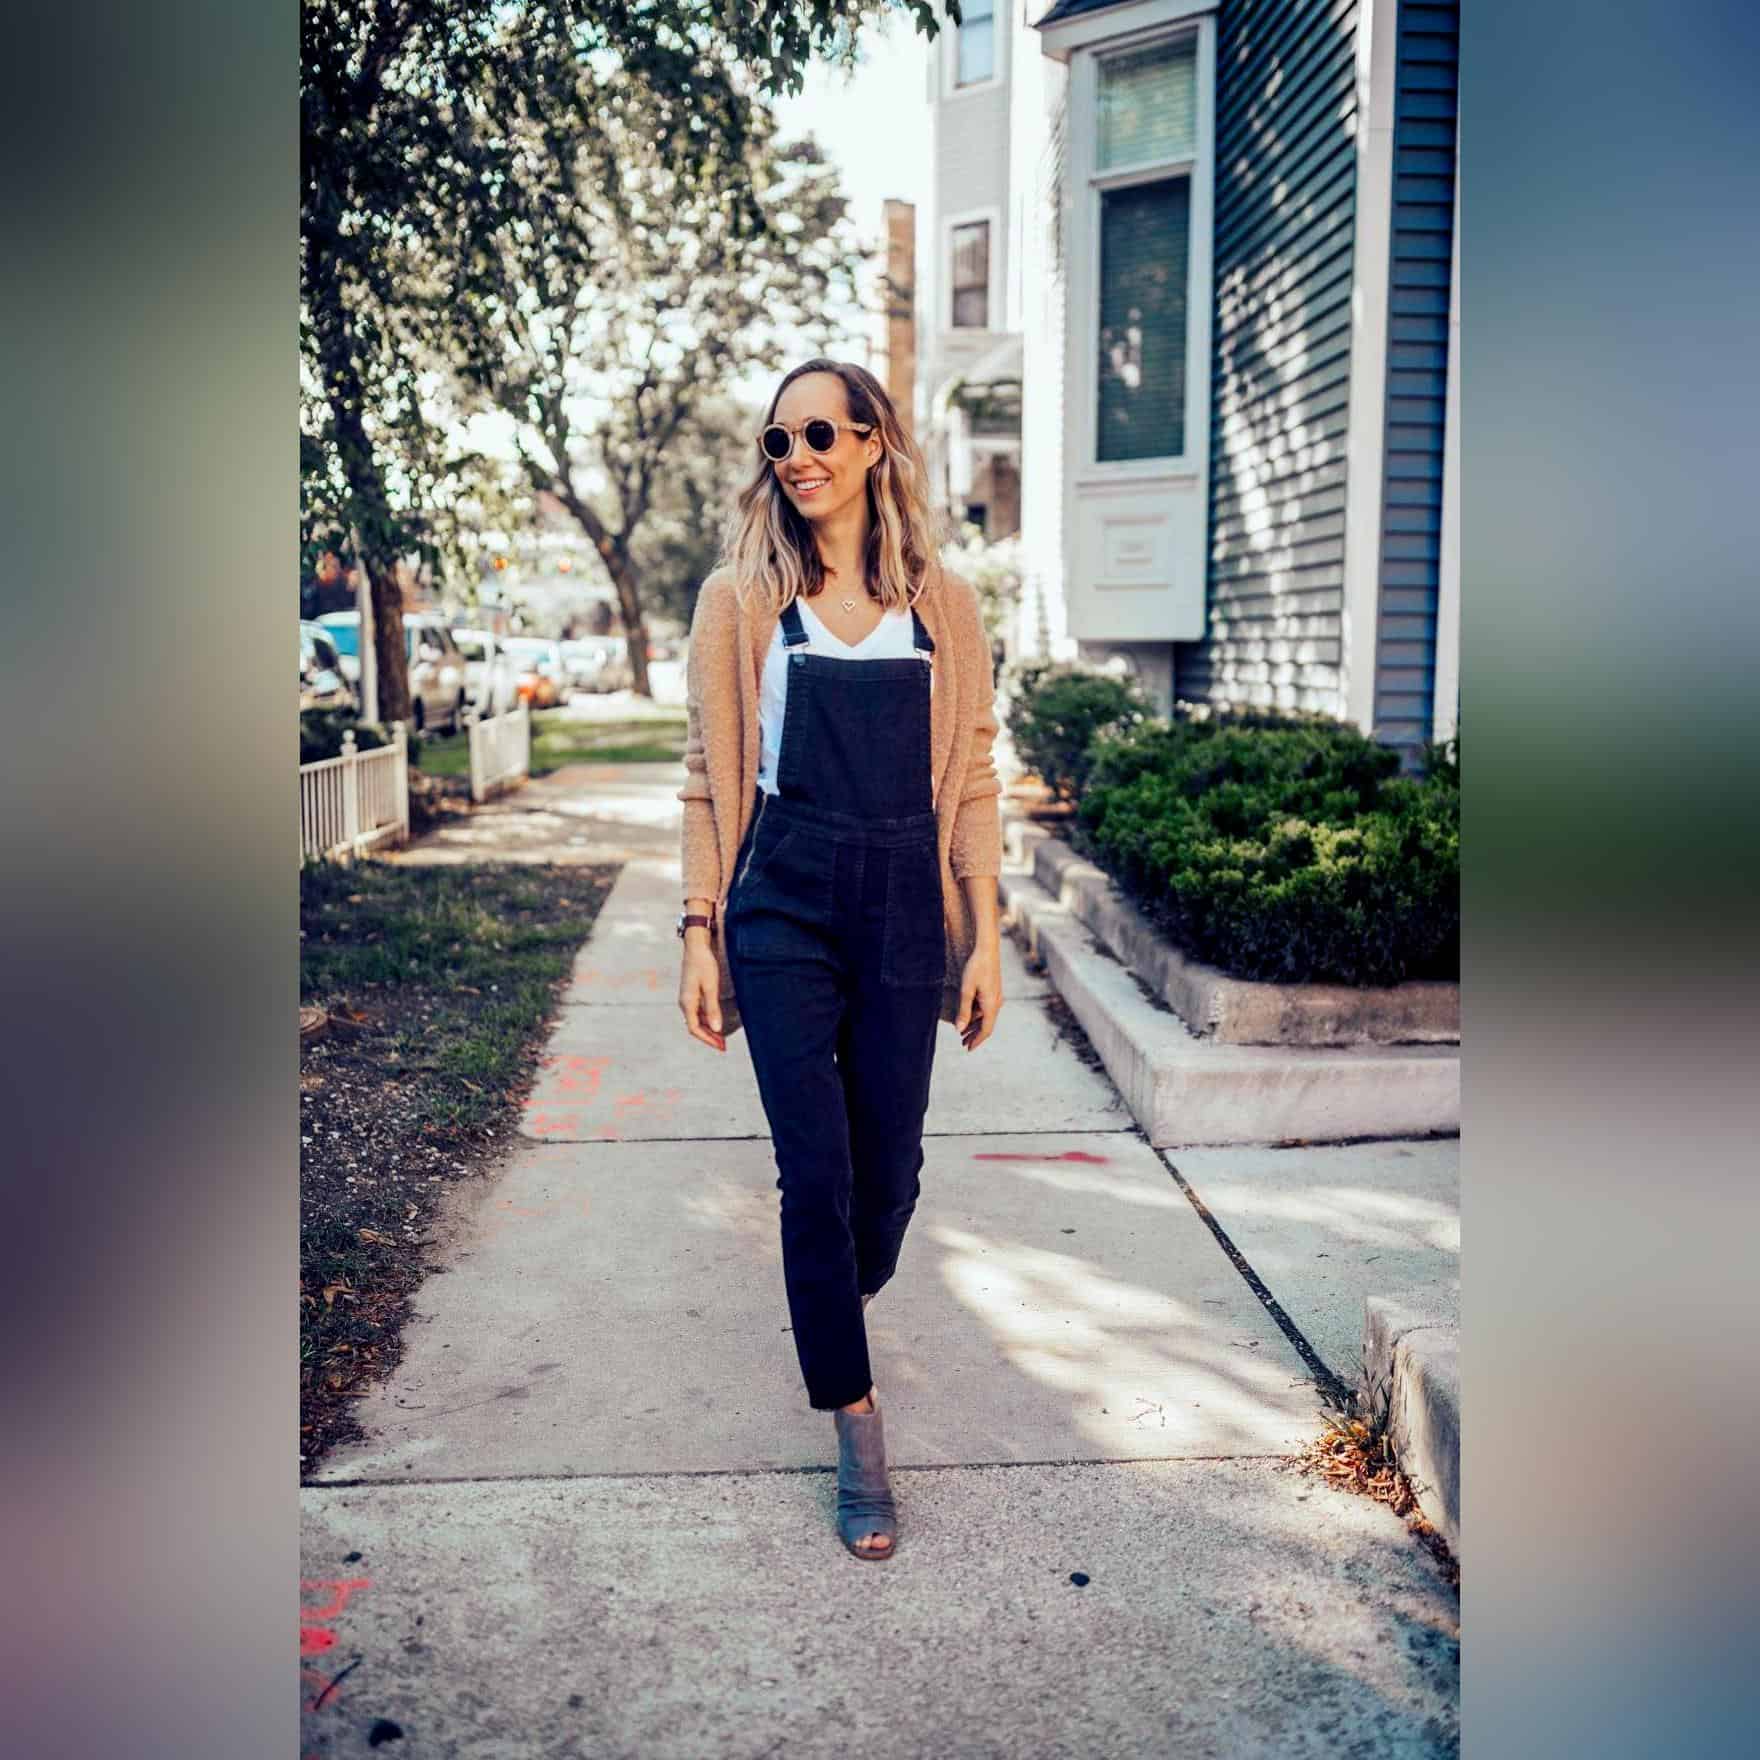 Carhartt Overalls Outfit: Inspiring Looks To INVEST 2023